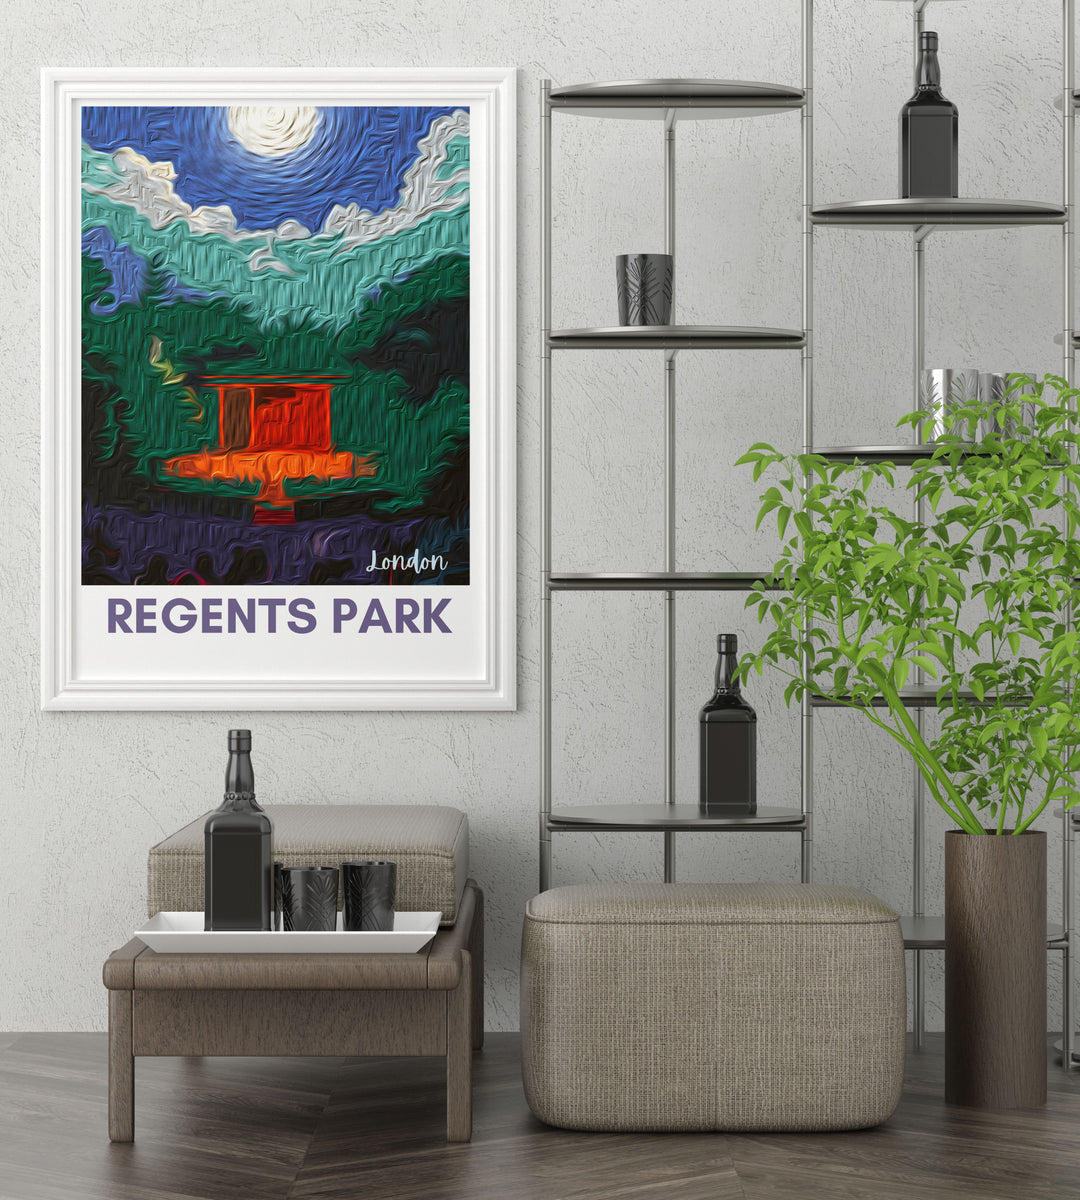 Stunning Gallery Wall Art of Regents Park, showcasing the tranquil beauty of Londons famous park, ideal for adding a touch of nature to your living space.